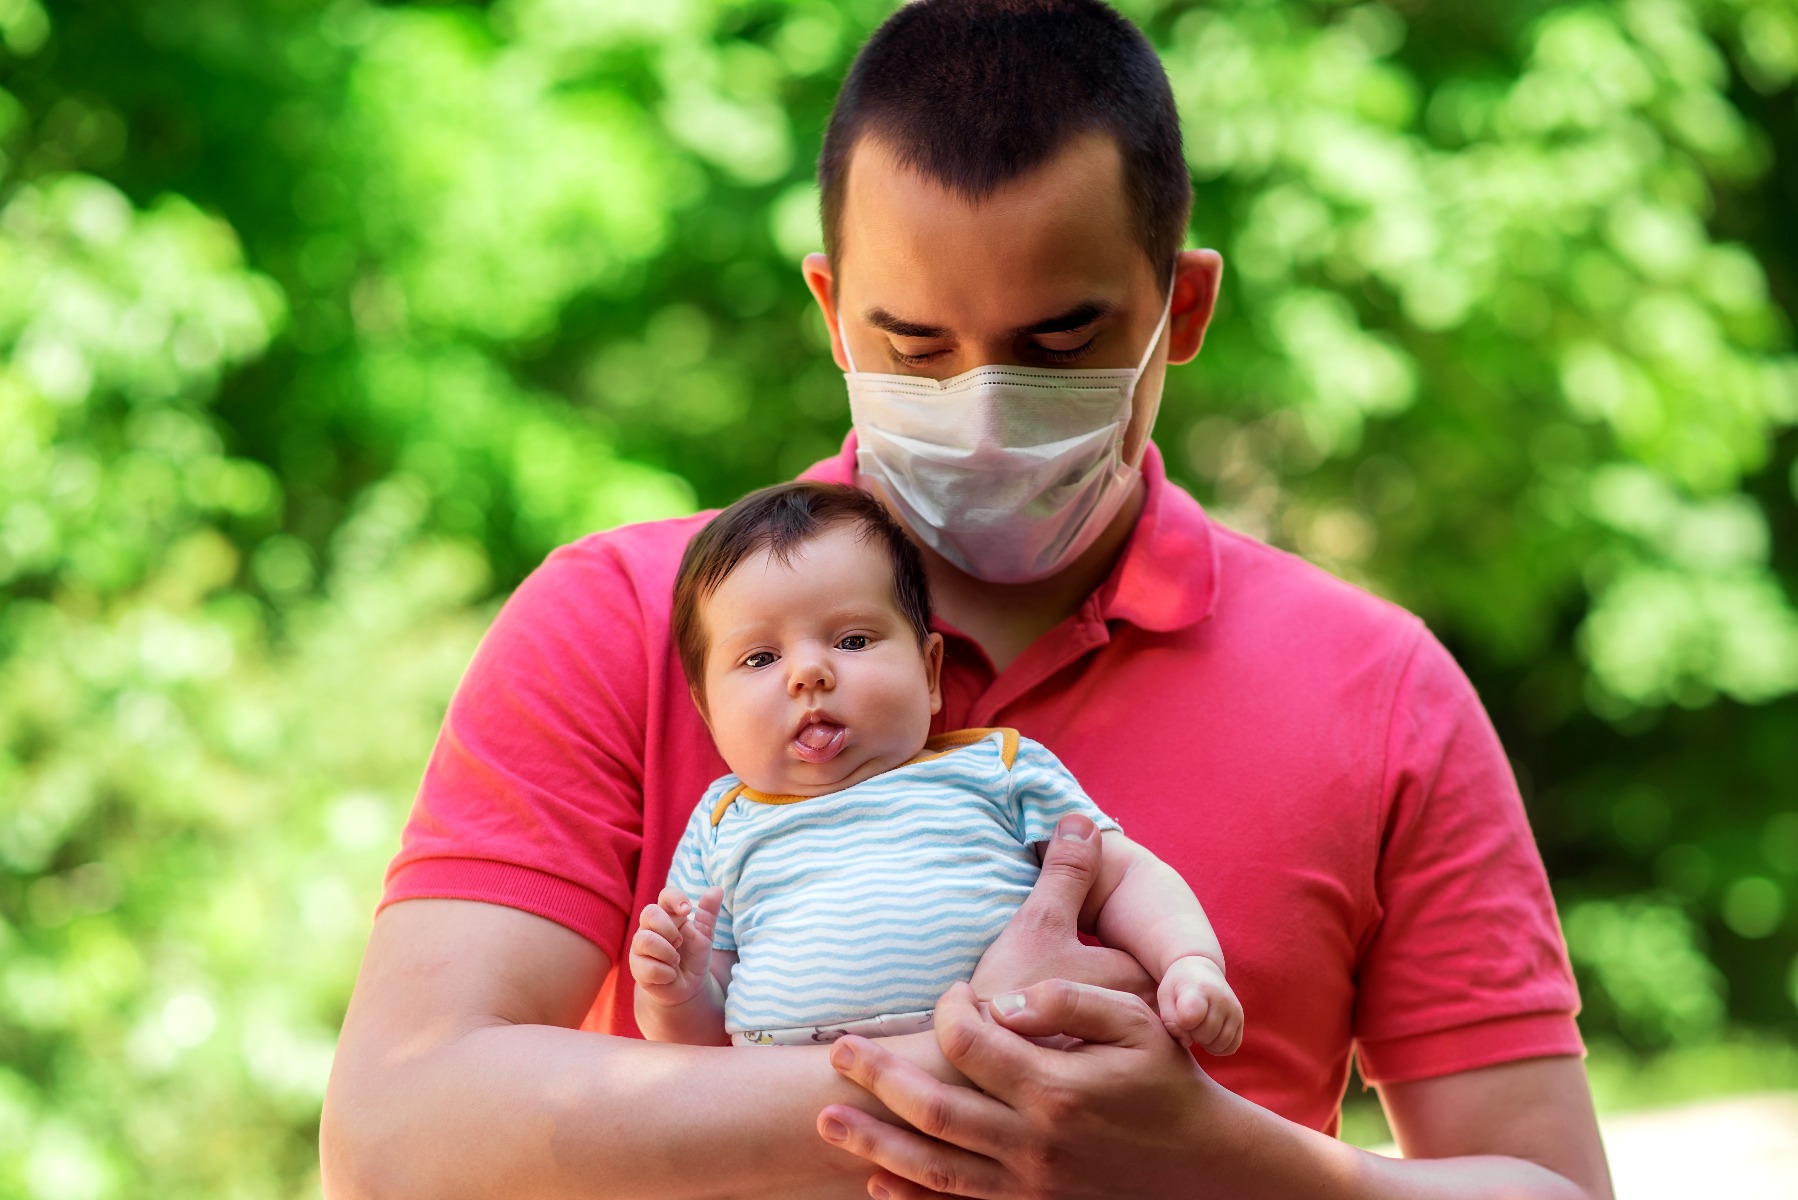 man with mask holding baby